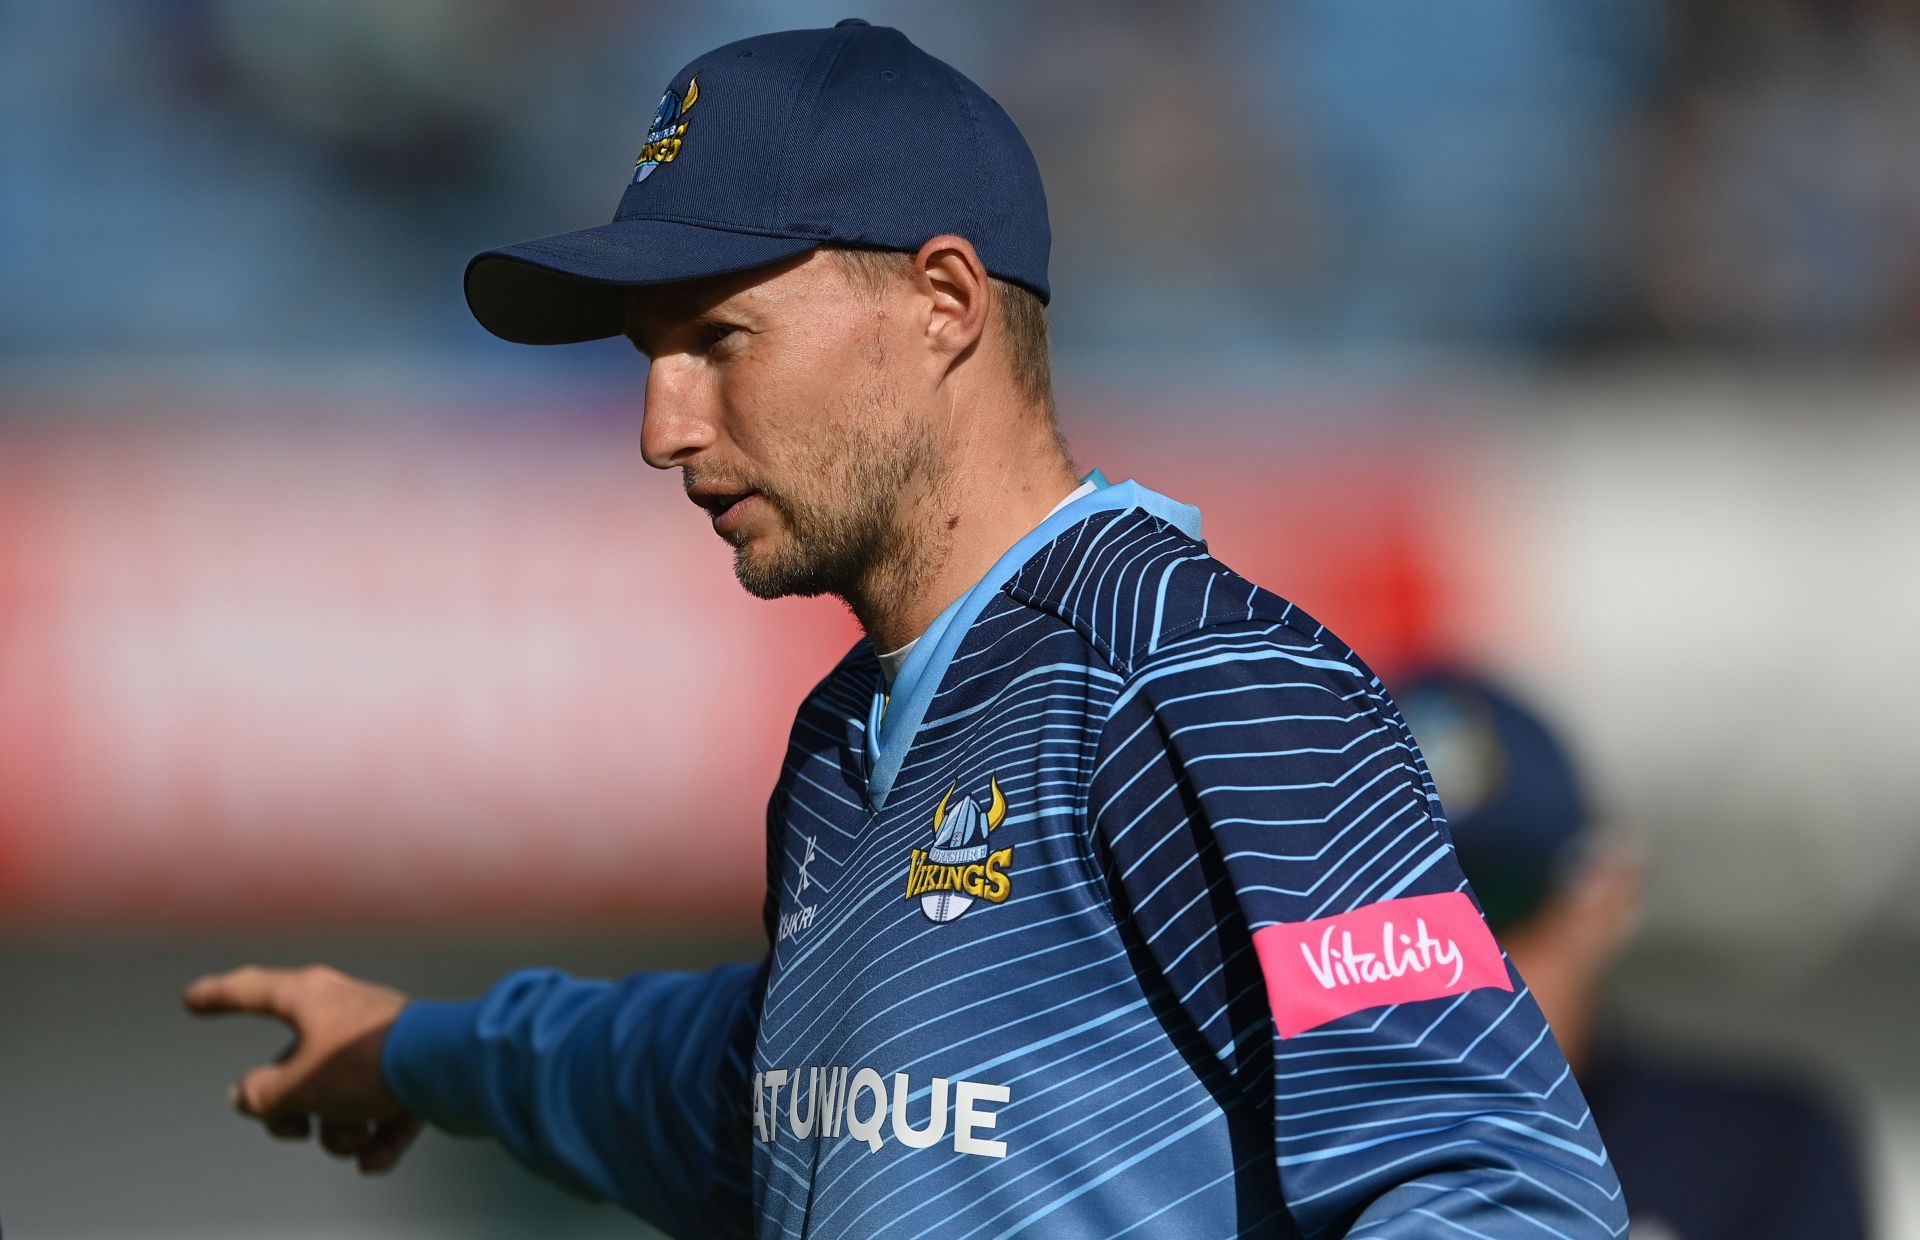 Yorkshire Vikings v Worcestershire Rapids - Vitality T20 Blast (Image courtesy: Getty Images)